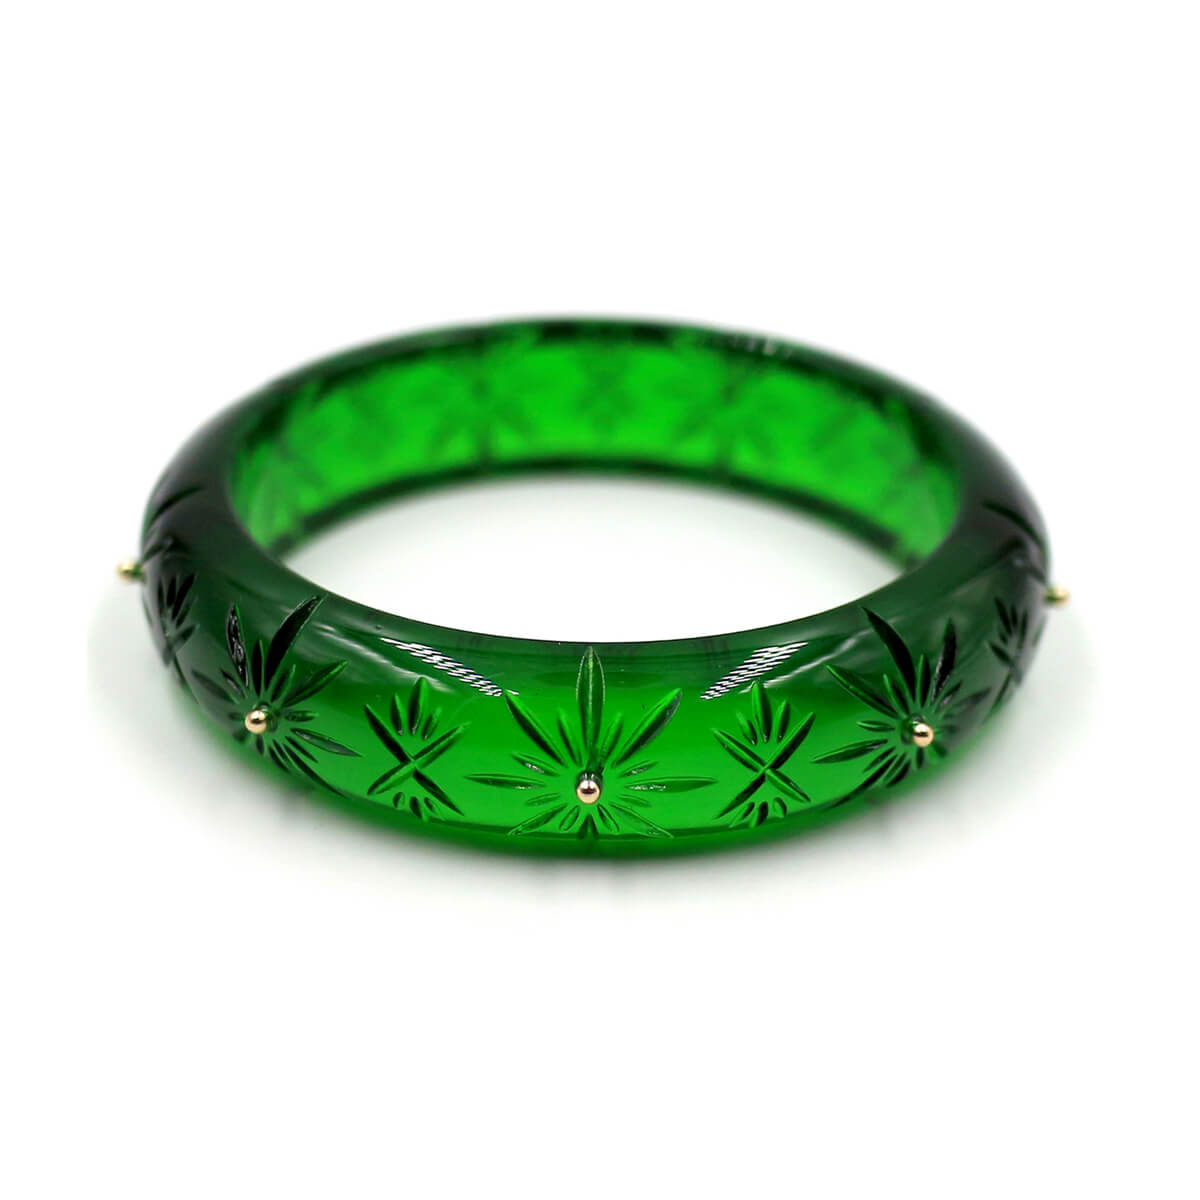 douglaspoon hand carved and polished resin bangle in emerald green & grey